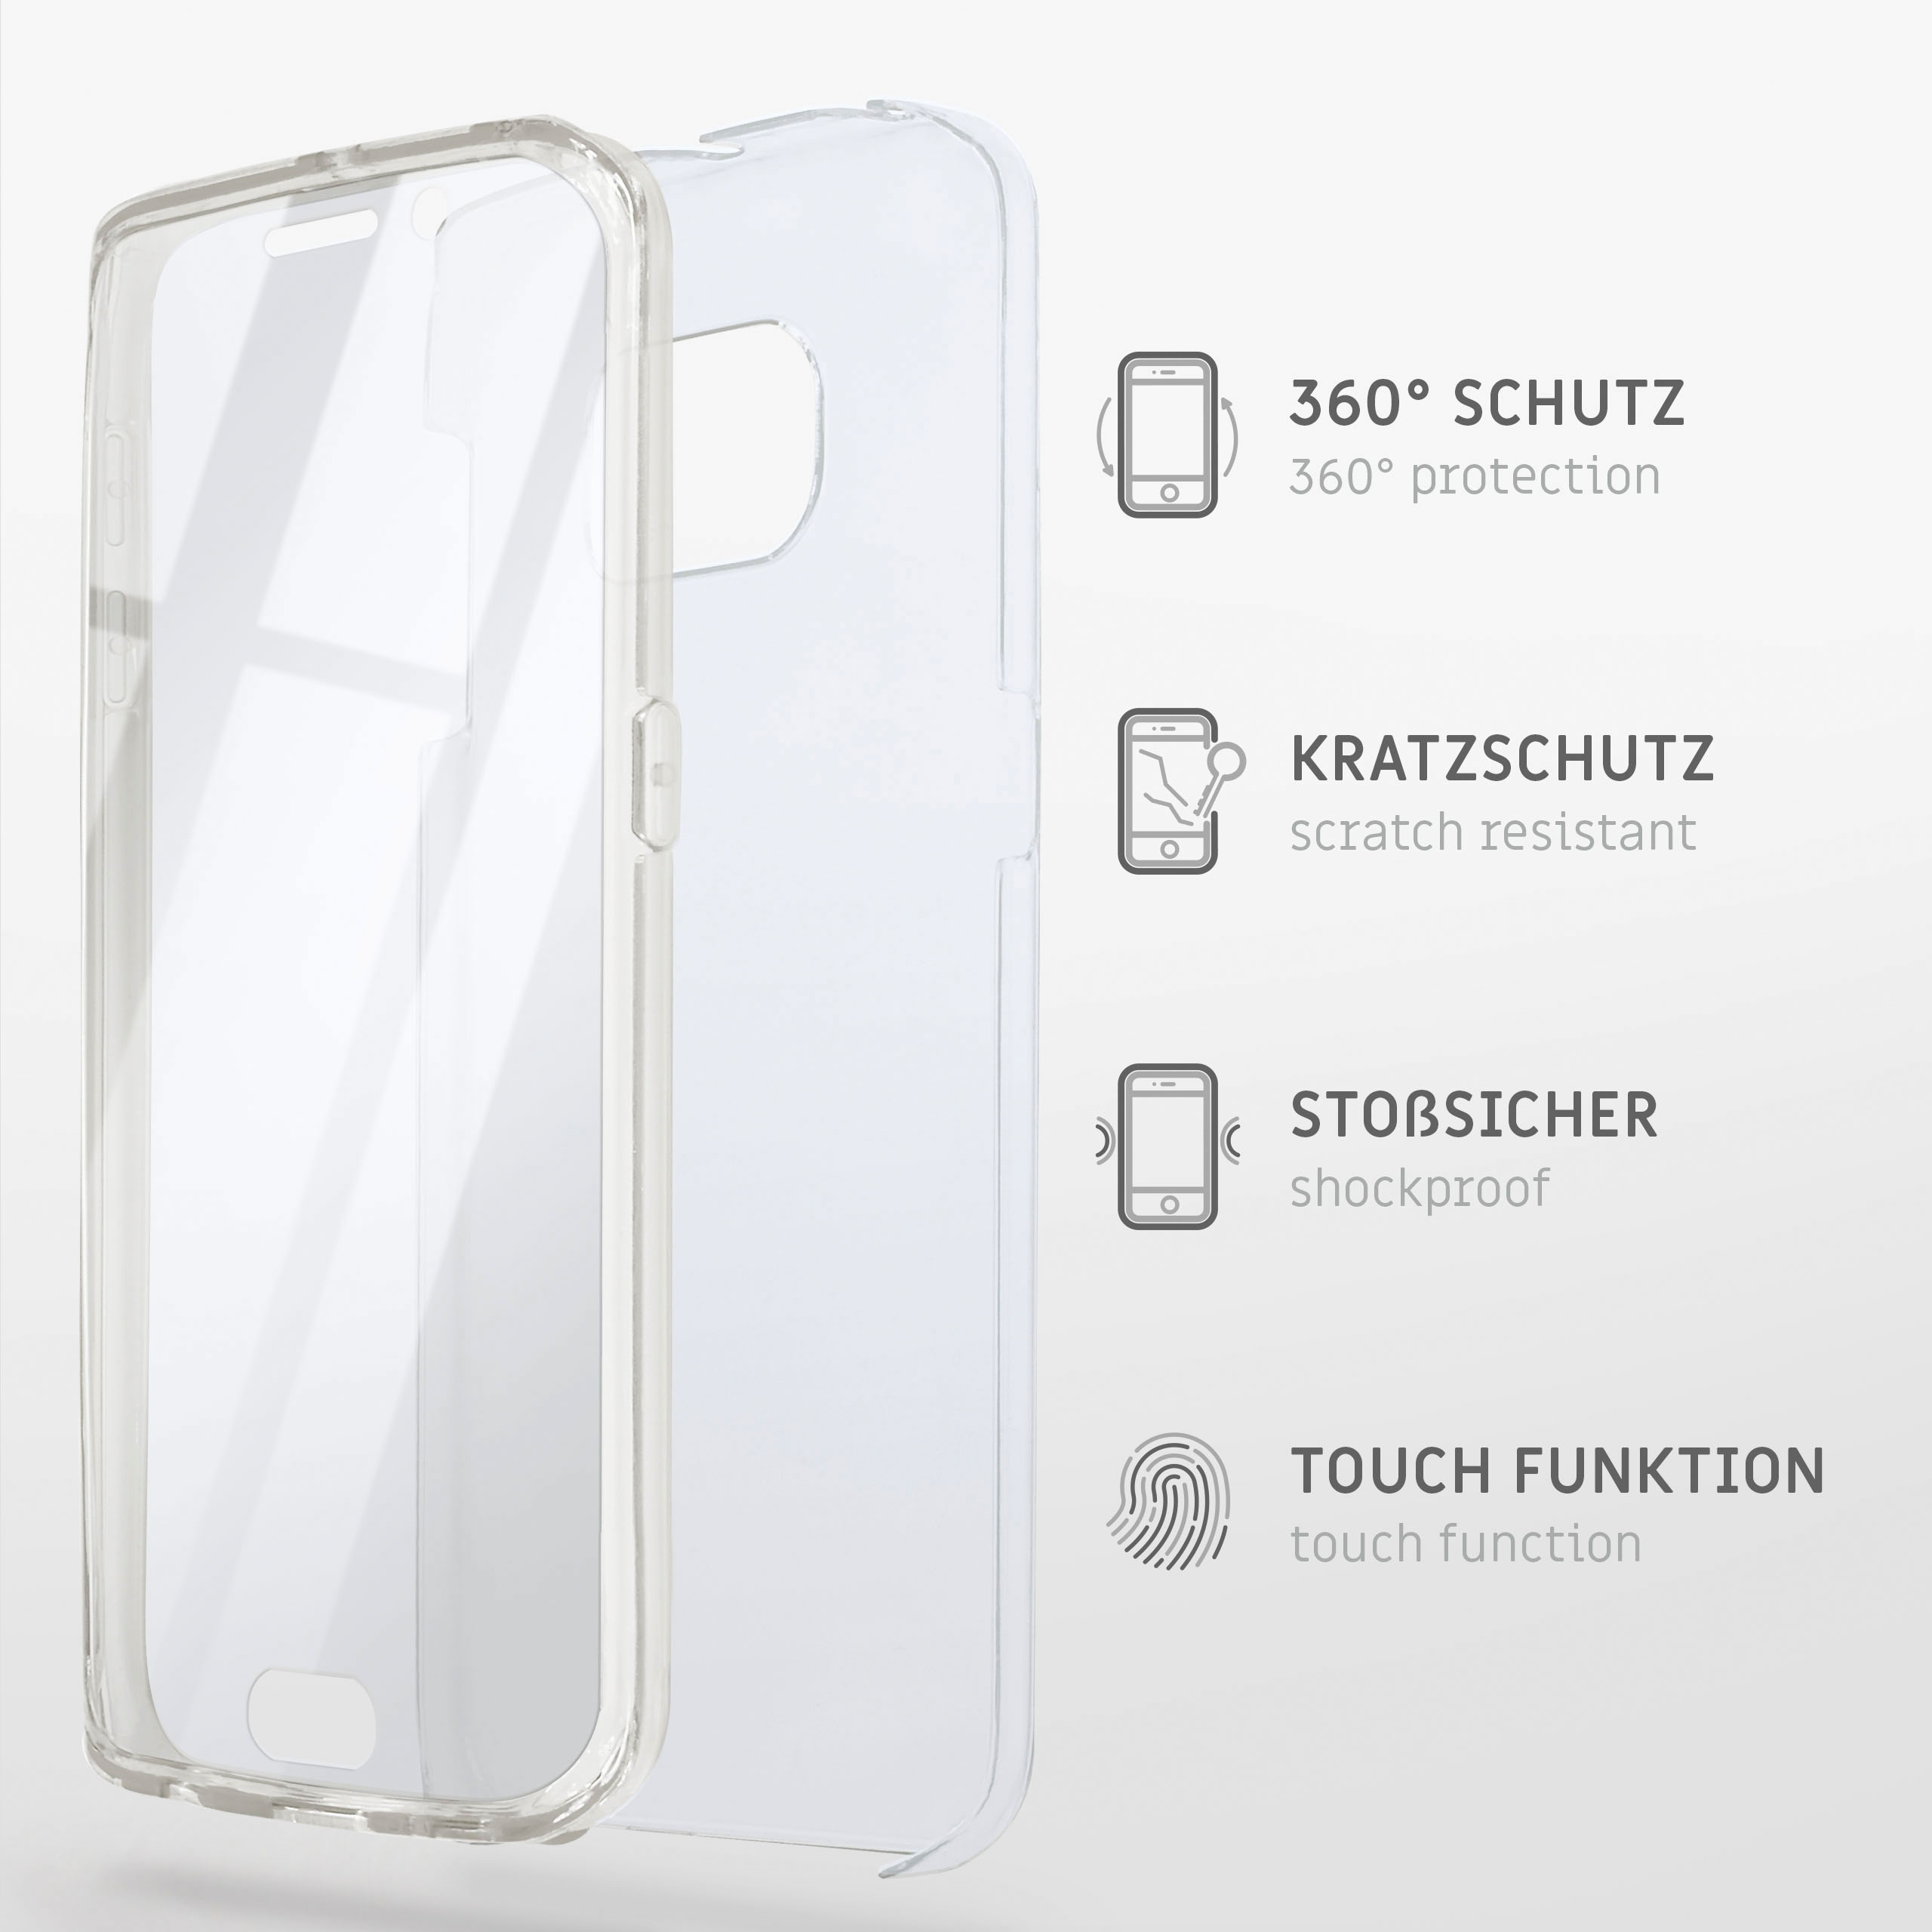 ONEFLOW Touch Case, S20 Cover, Galaxy FE, Full Ultra-Clear Samsung